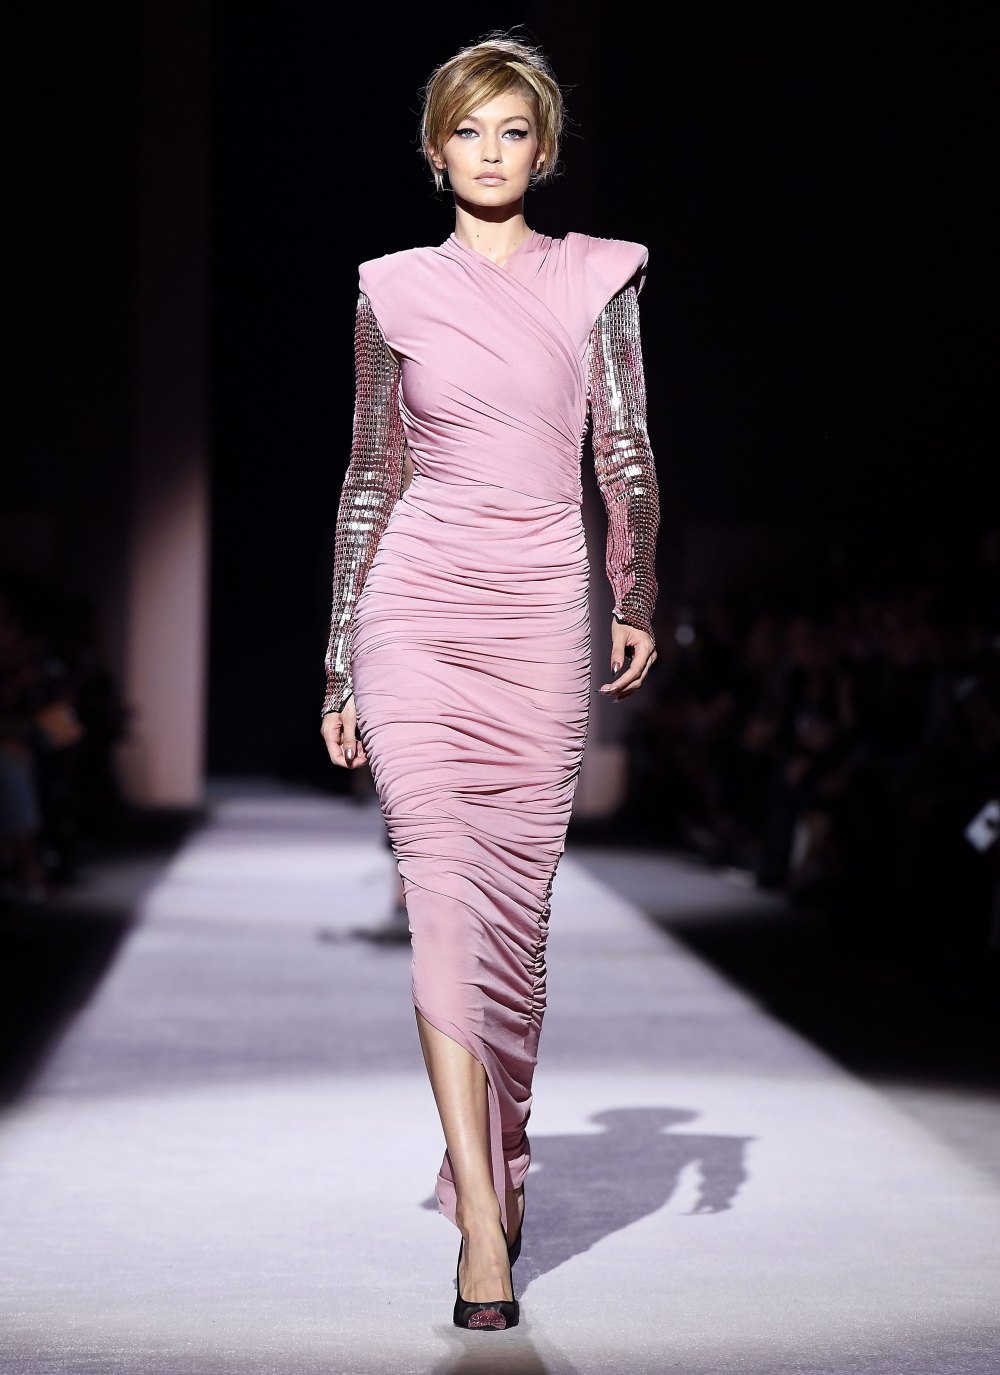 Kendall Jenner Rocked a Pixie Cut at Tom Ford NYFW Show: Pic